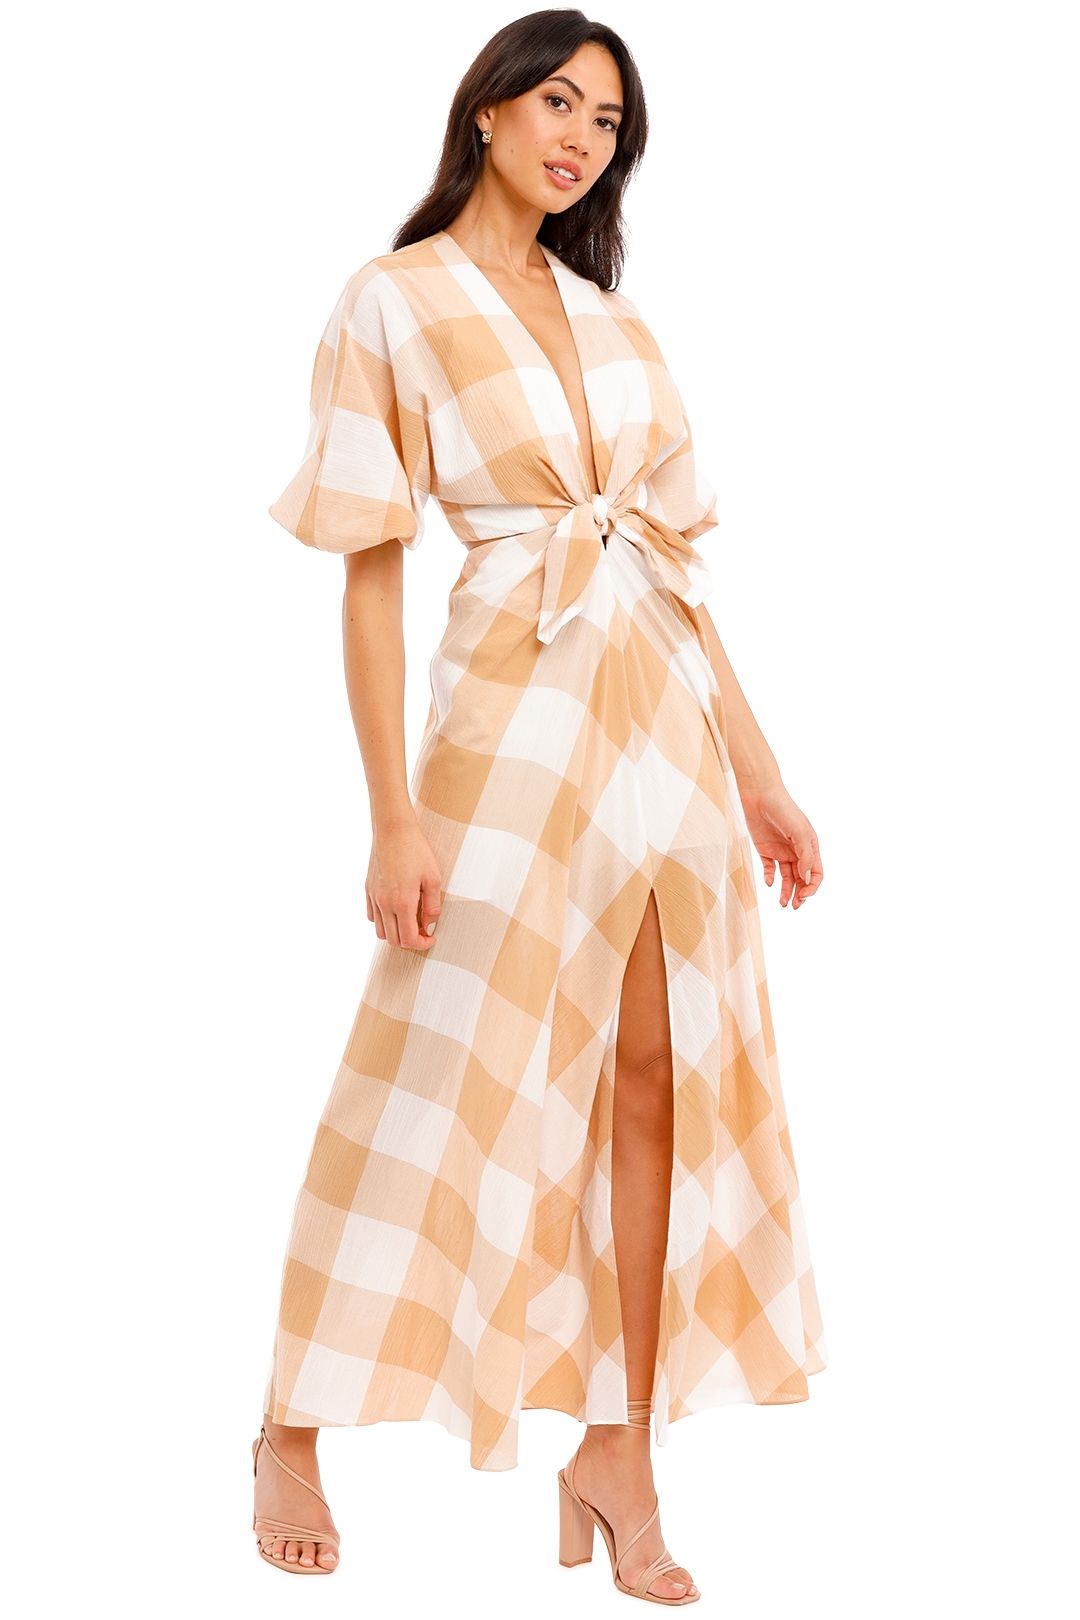 Significant Other Frida Dress in Caramel Check Midi